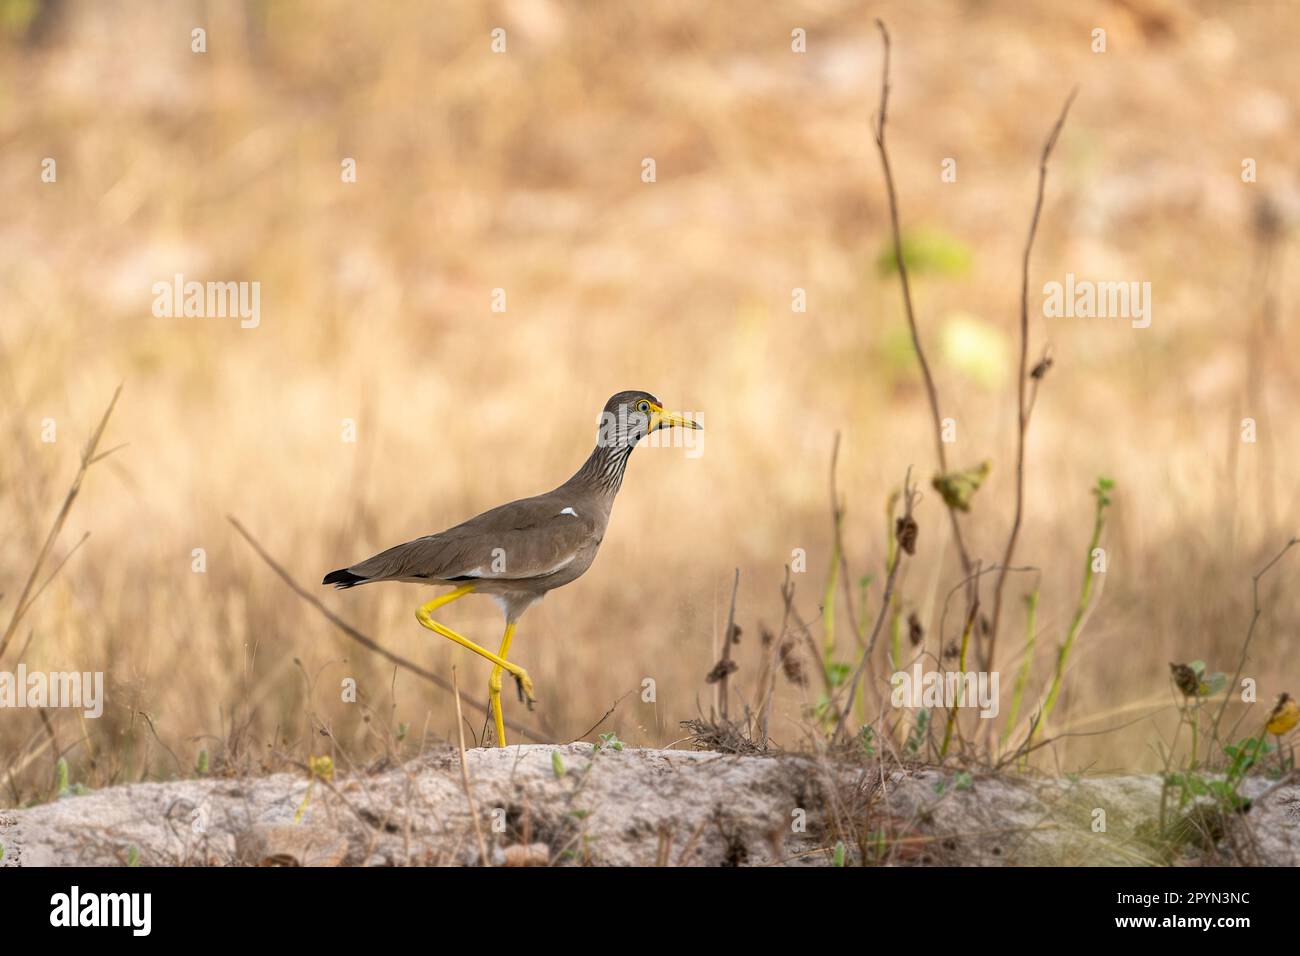 African wattled lapwing (Vanellus senegallus), standing in a dried out field in The Gambia Stock Photo